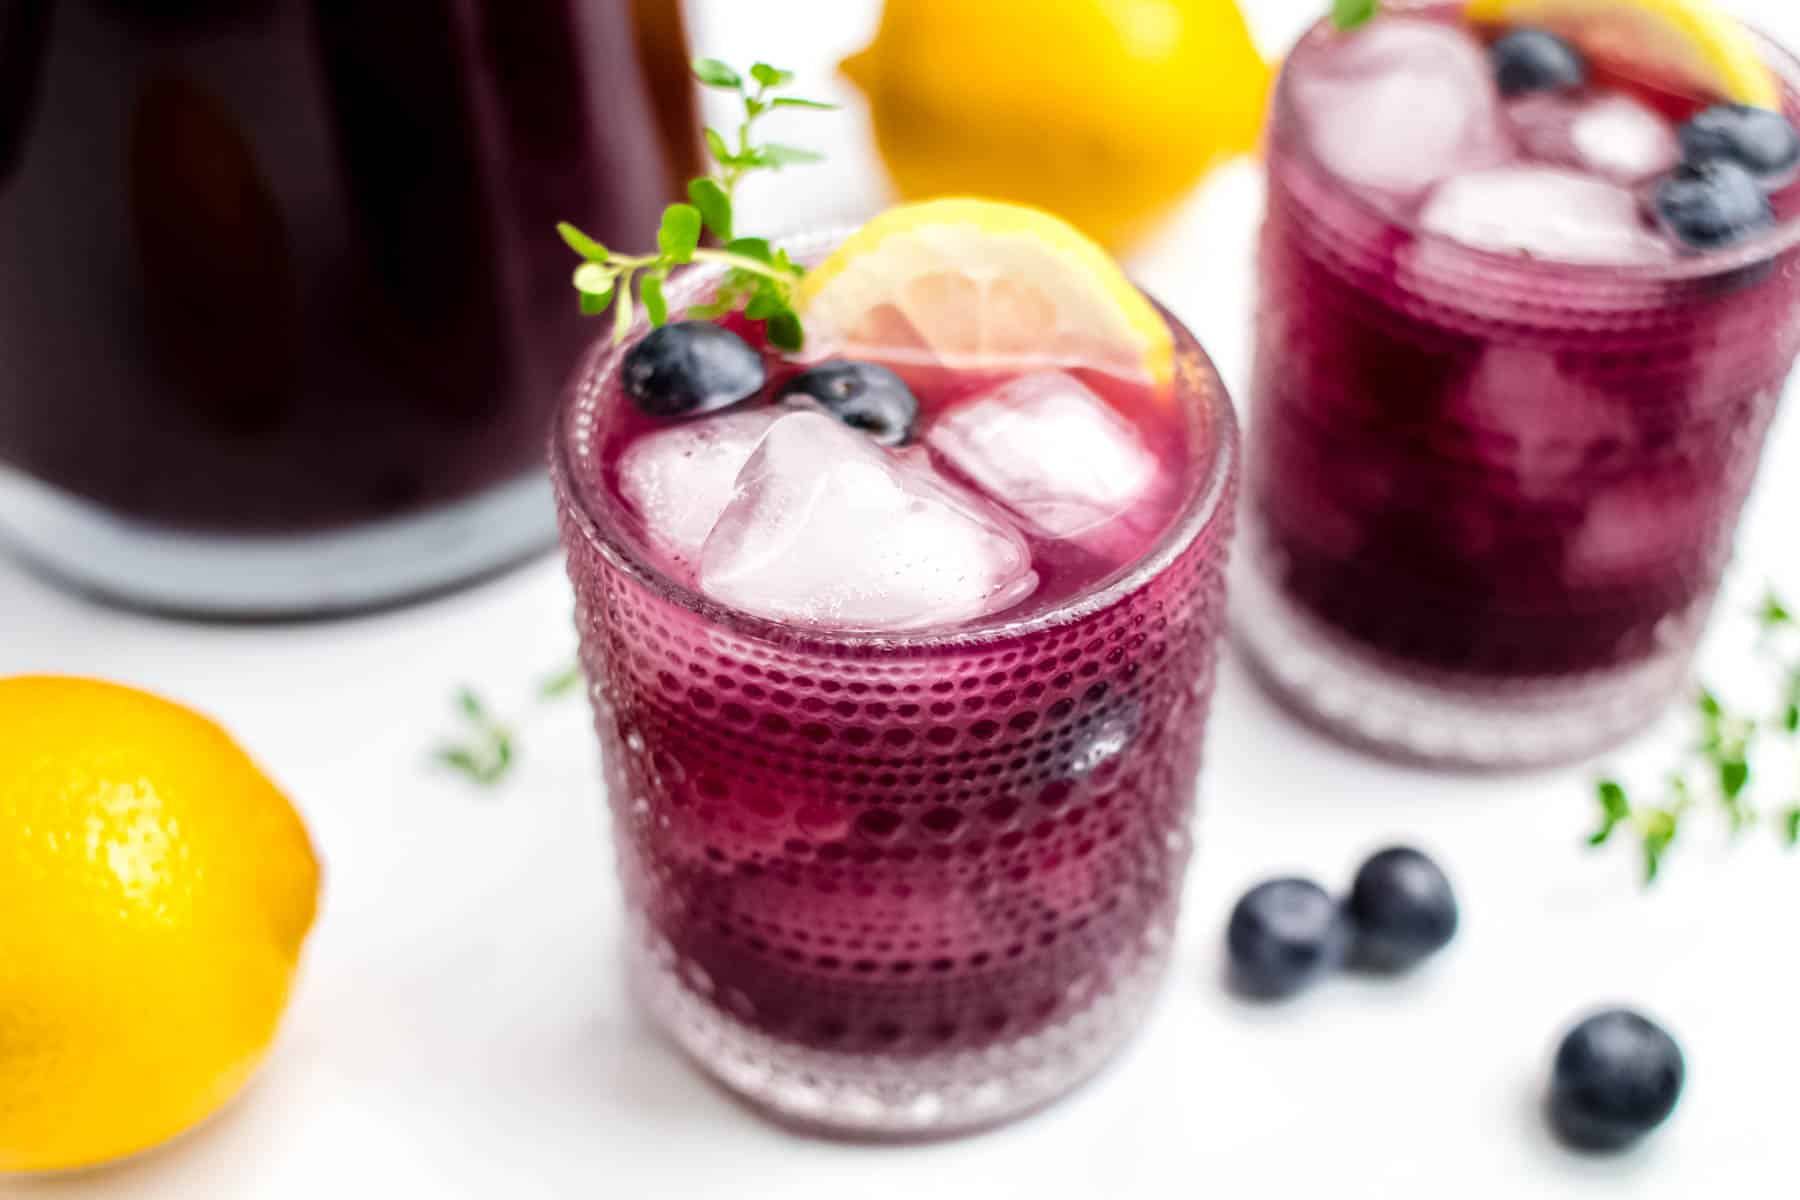 Two glasses of blueberry lemonade garnished with lemon, blueberries and herbs.